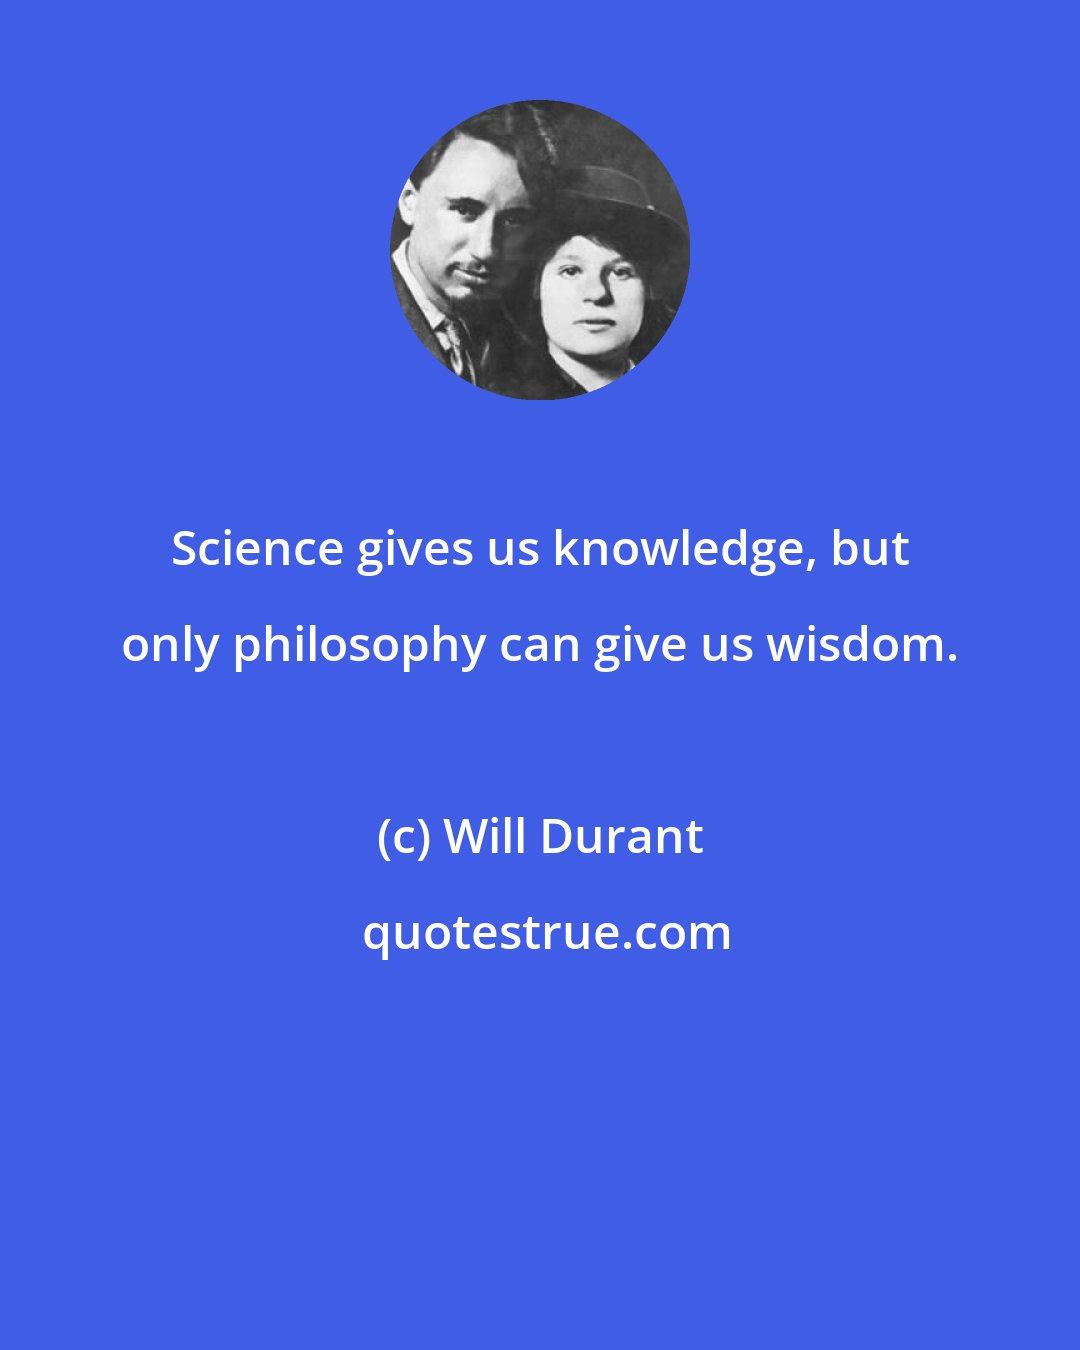 Will Durant: Science gives us knowledge, but only philosophy can give us wisdom.